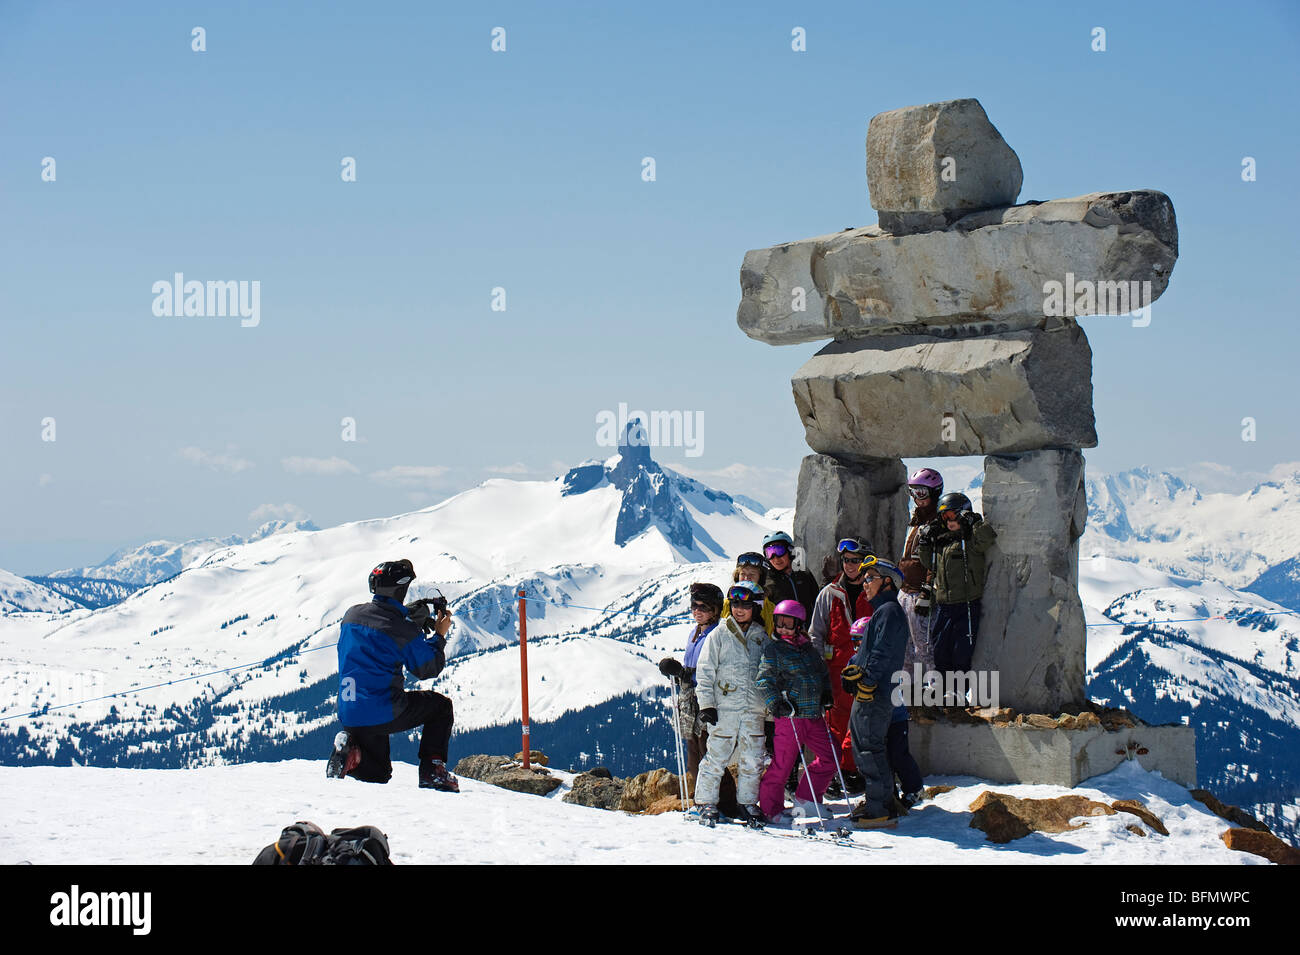 Canada, British Columbia, Whistler, venue of the 2010 Winter Olympic Games, an Inuit Inukshuk stone statue and Black Tusk Peak Stock Photo